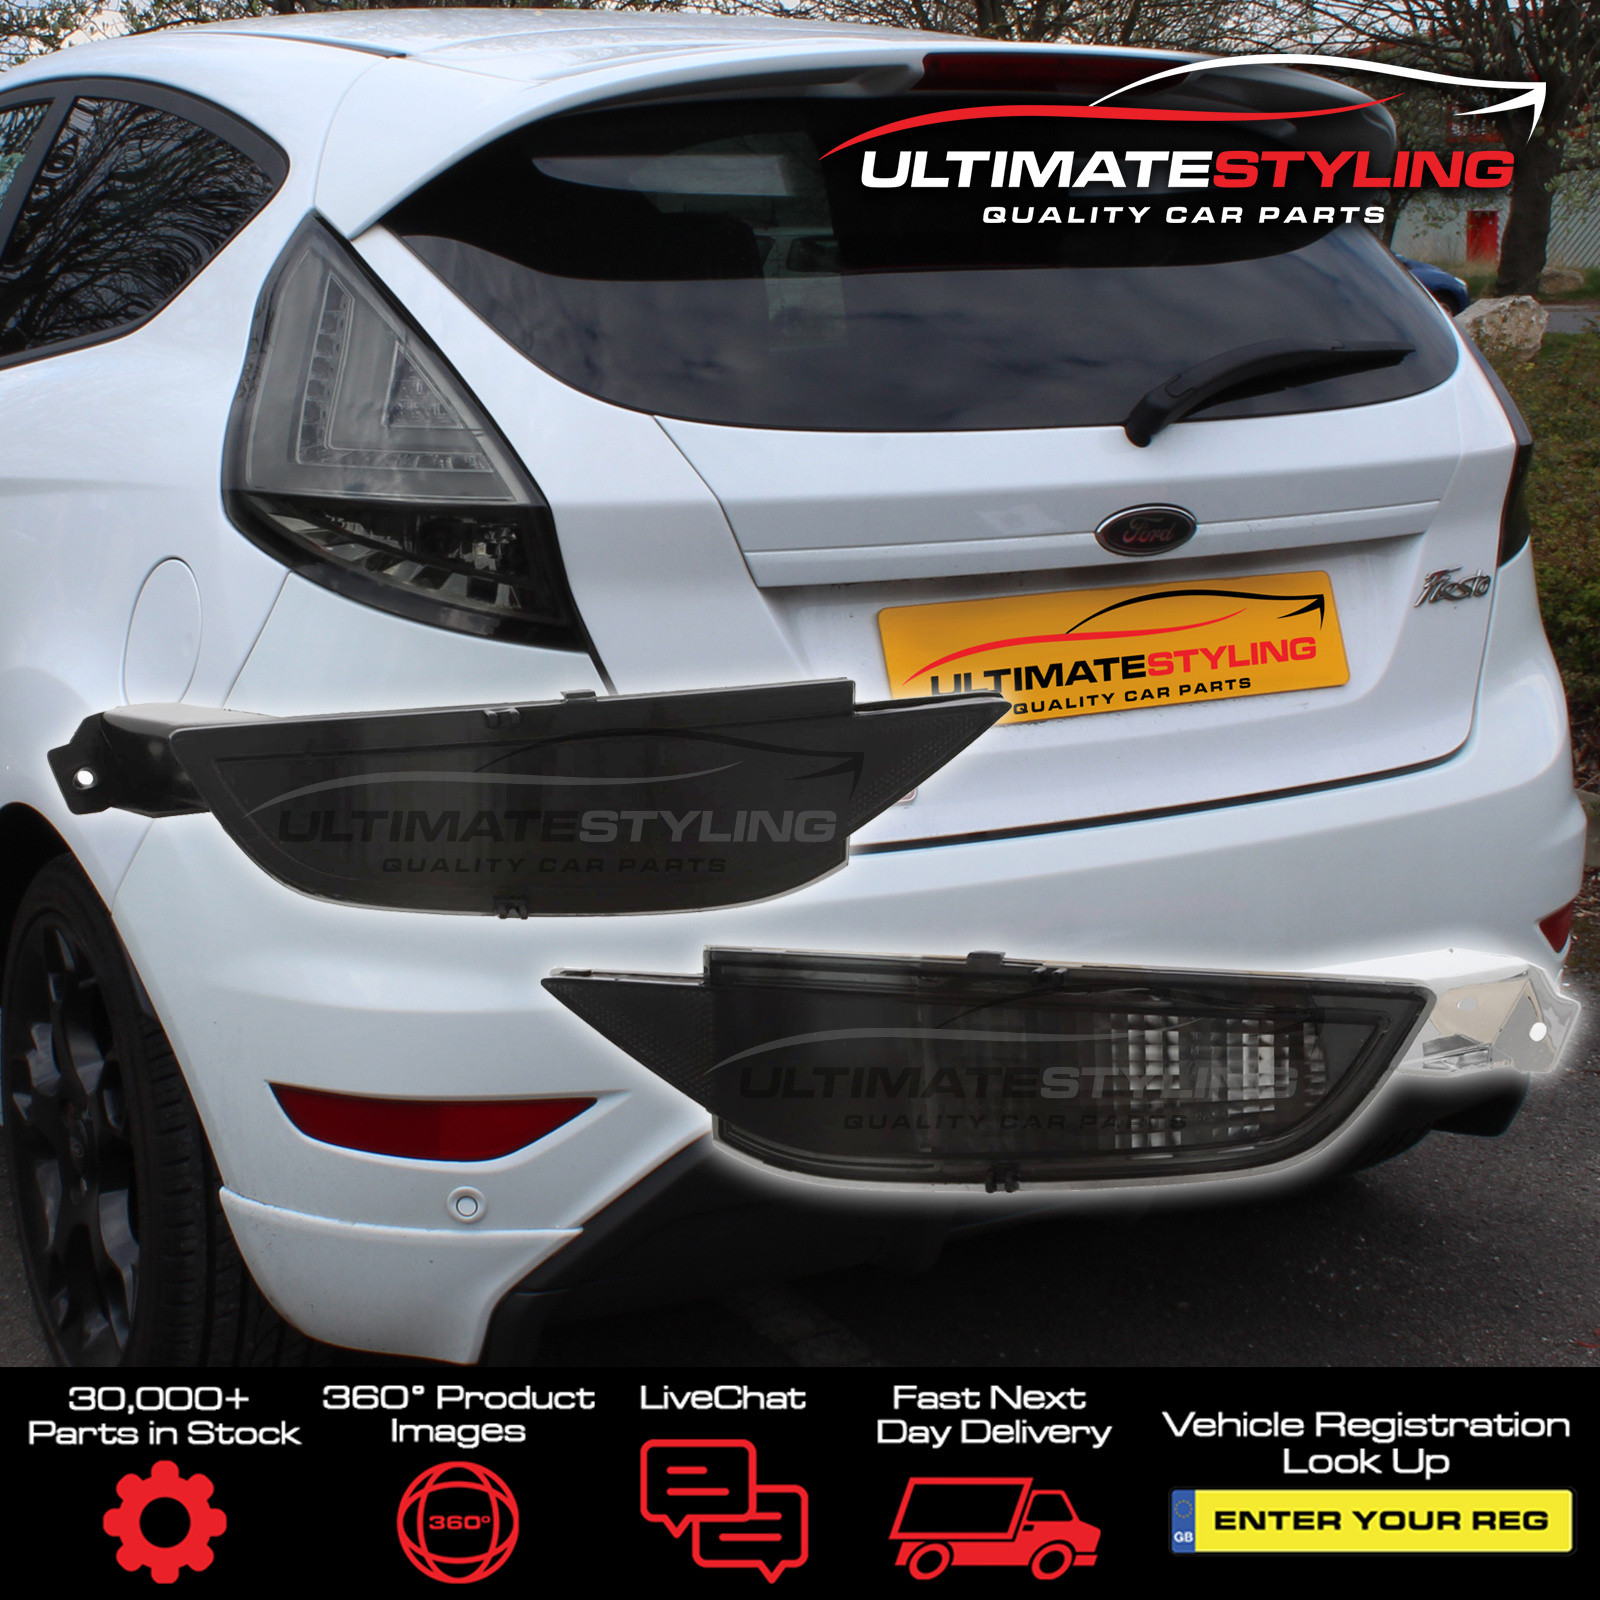 https://ultimatestyling.co.uk/storage/product-images/PLL9170/ford-fiesta-mk7-smoked-rear-fog-light-and-reflector-set.jpg